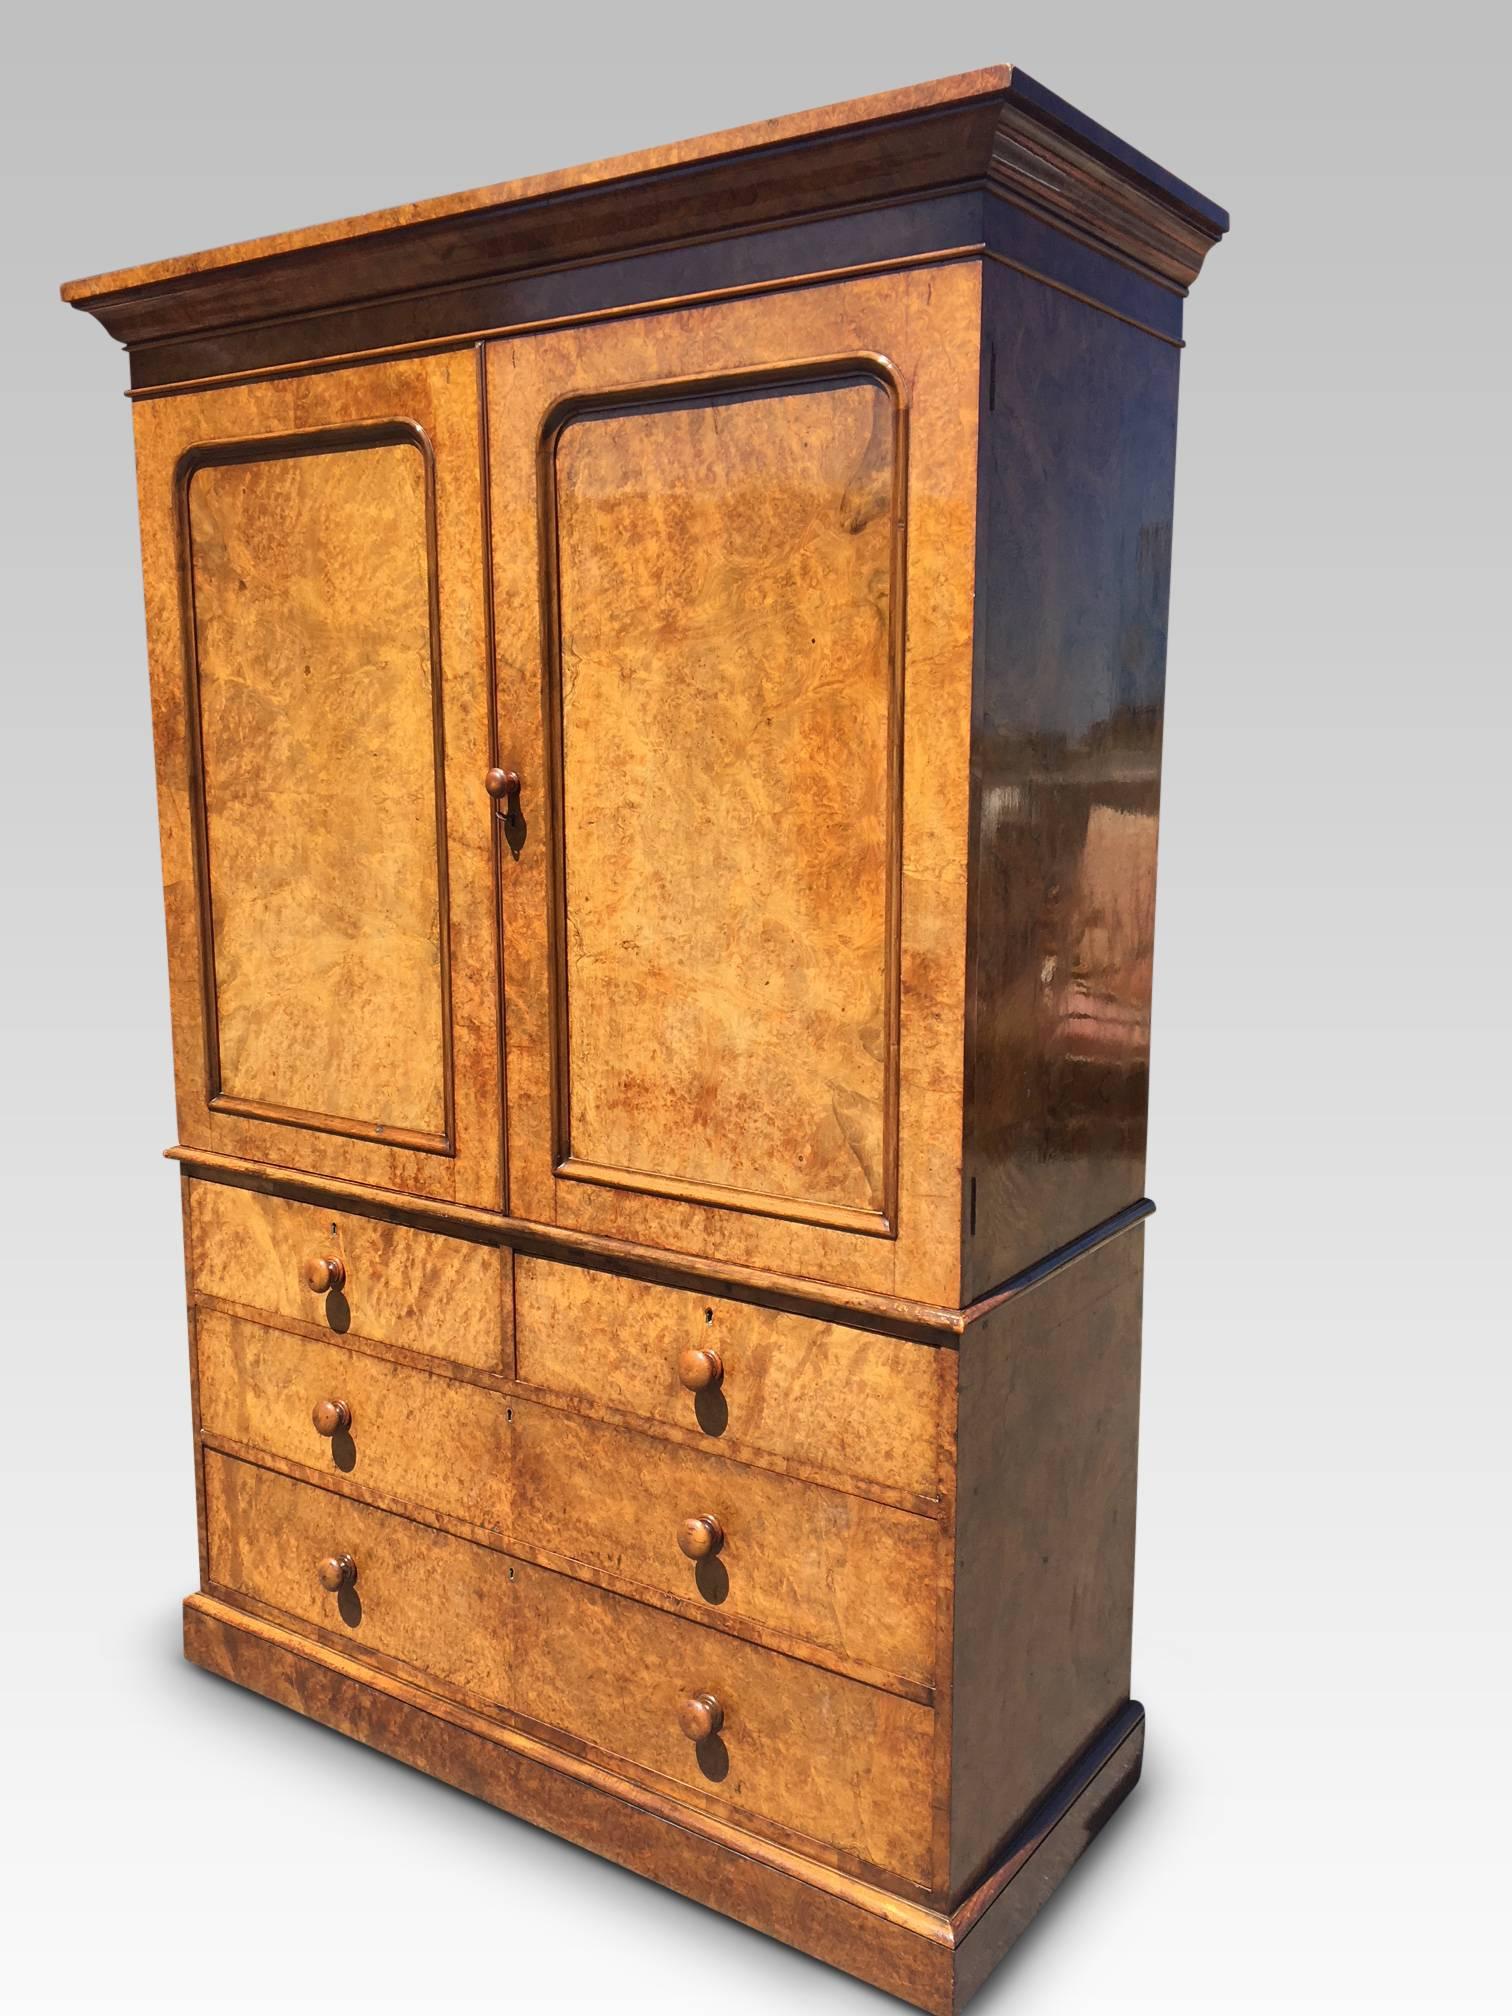 Fine quality English Burr Walnut linen press by the renowned company of Heal & Sons, London, circa 1850
This delightful linen press is veneered in burr walnut on mahogany. The doors close neatly, are flat and open to reveal four beautifully made